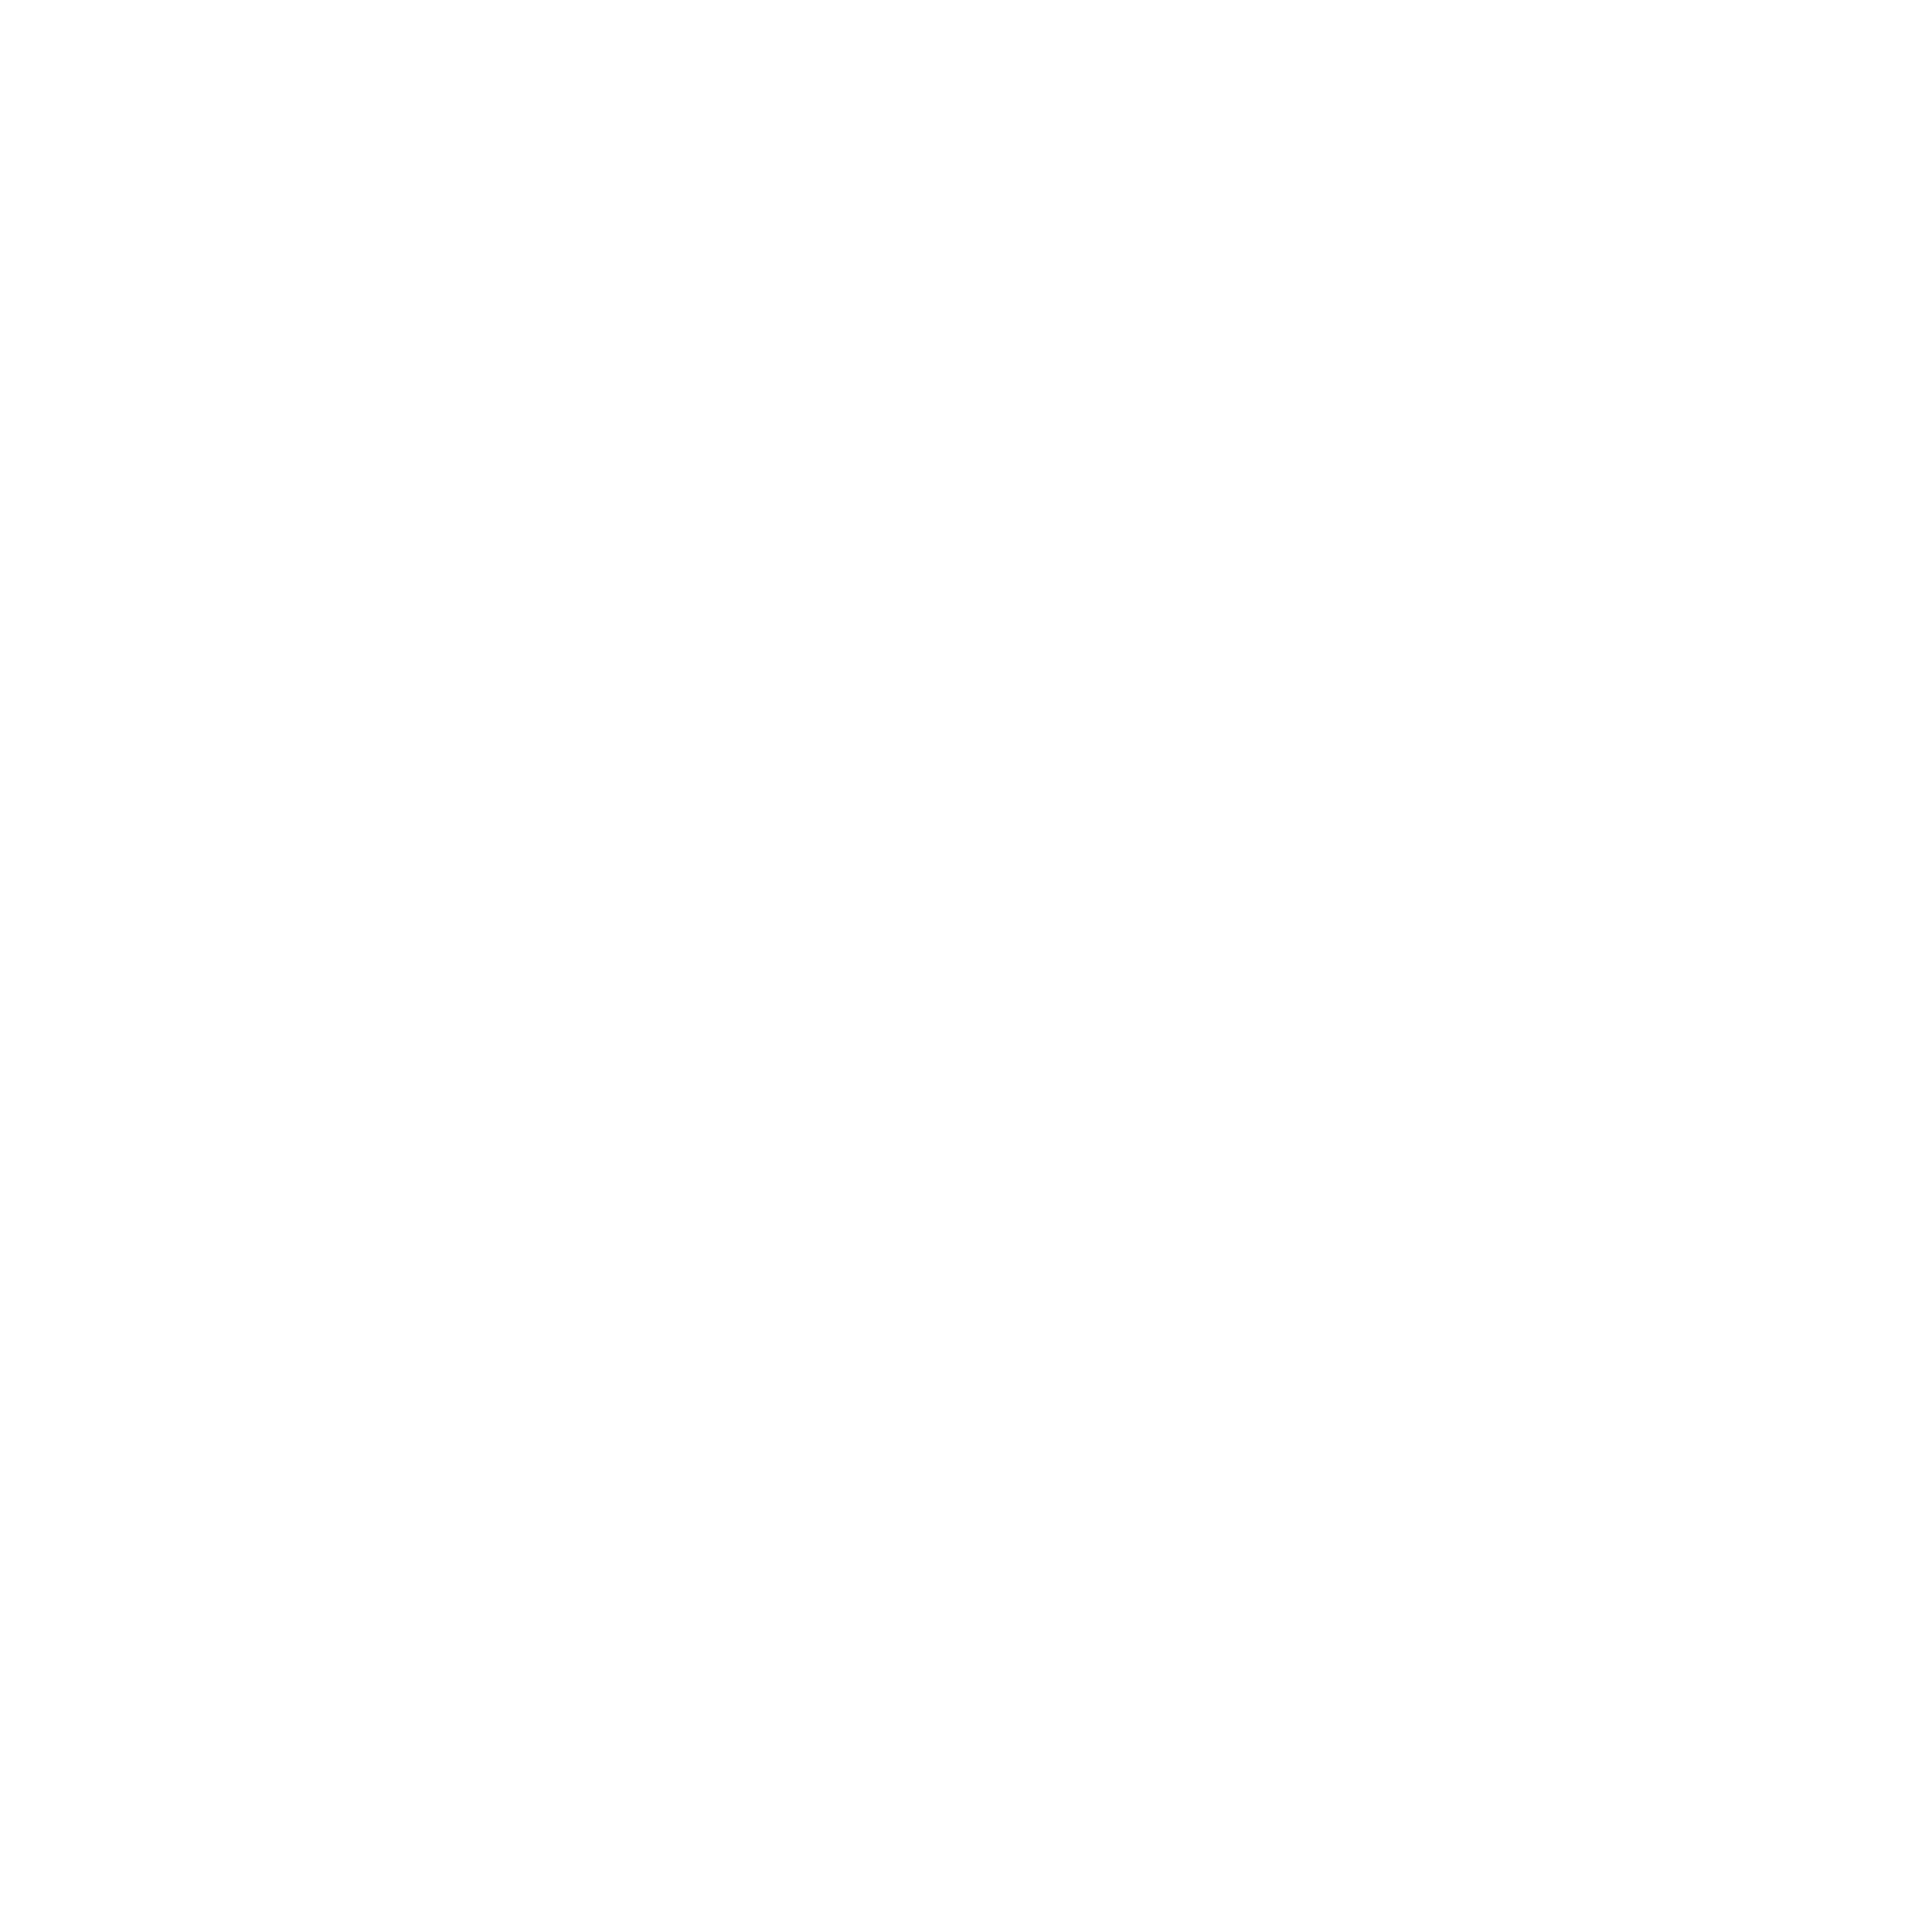 Lunch Table logo